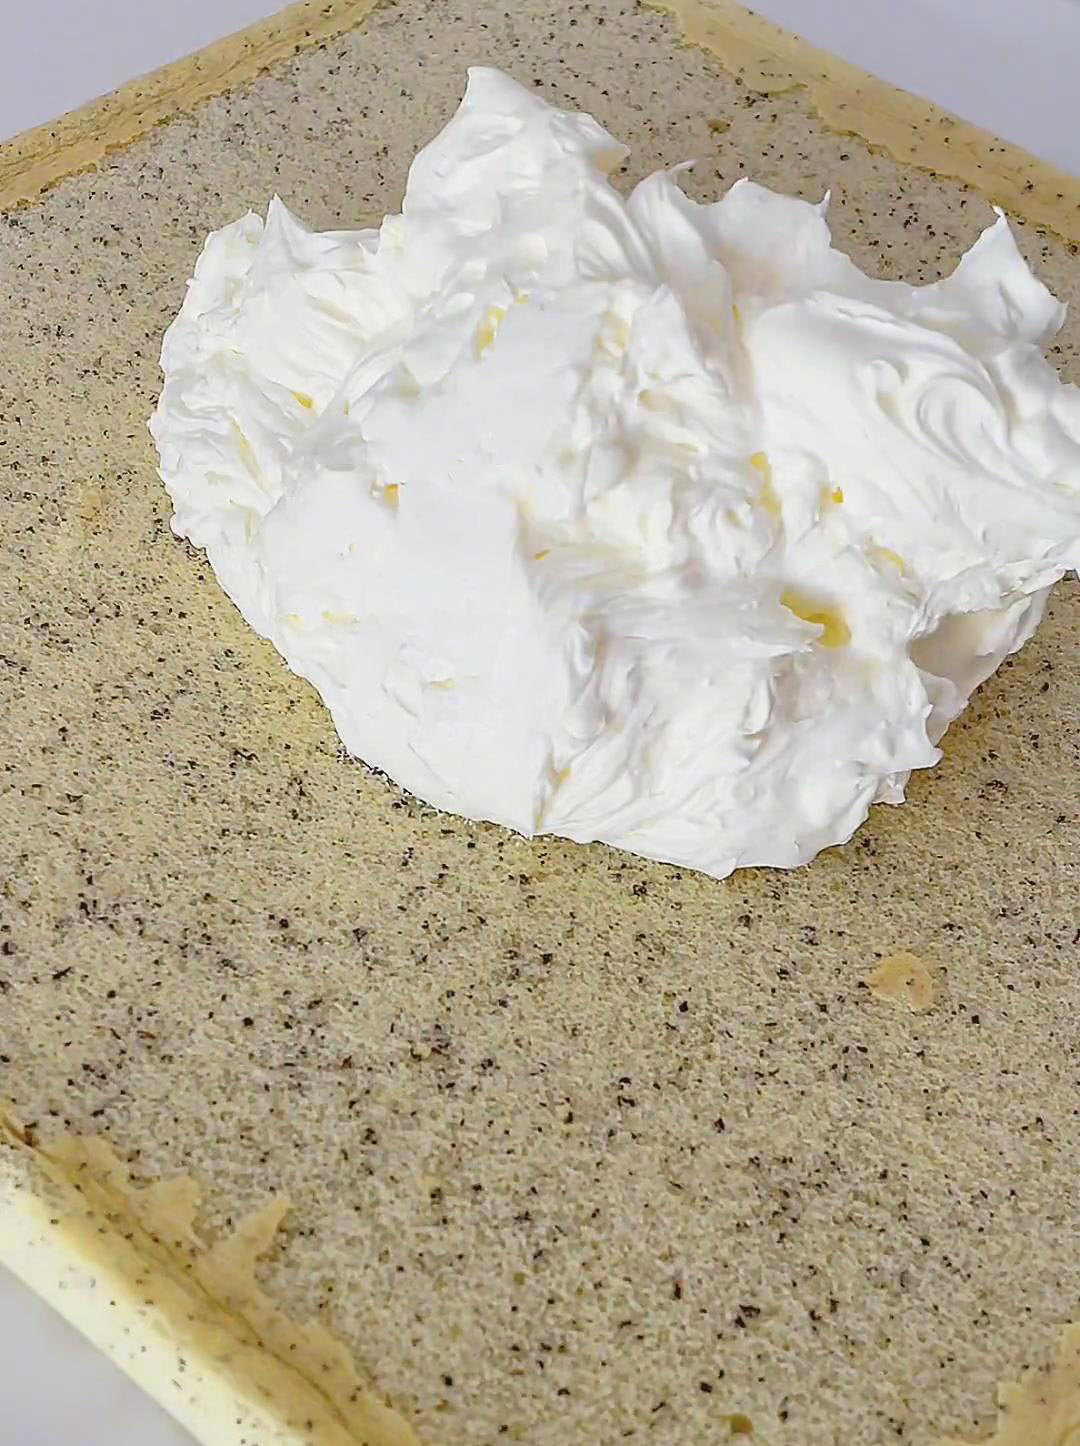 Spread the whipped cream evenly over the surface of the cake